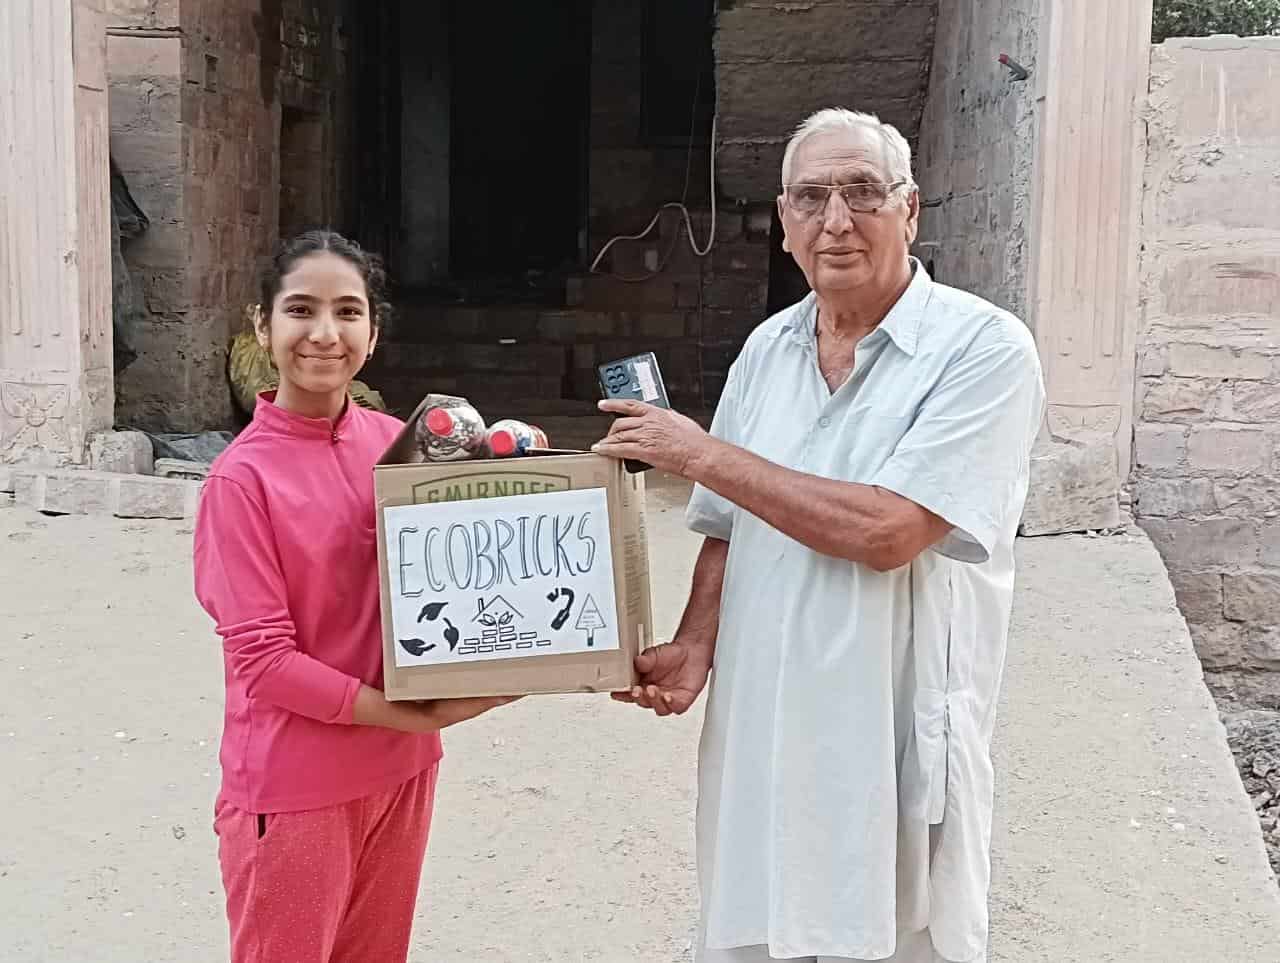 Apurva distributing eco-bricks for the construction of a house with a Senior Citizen.